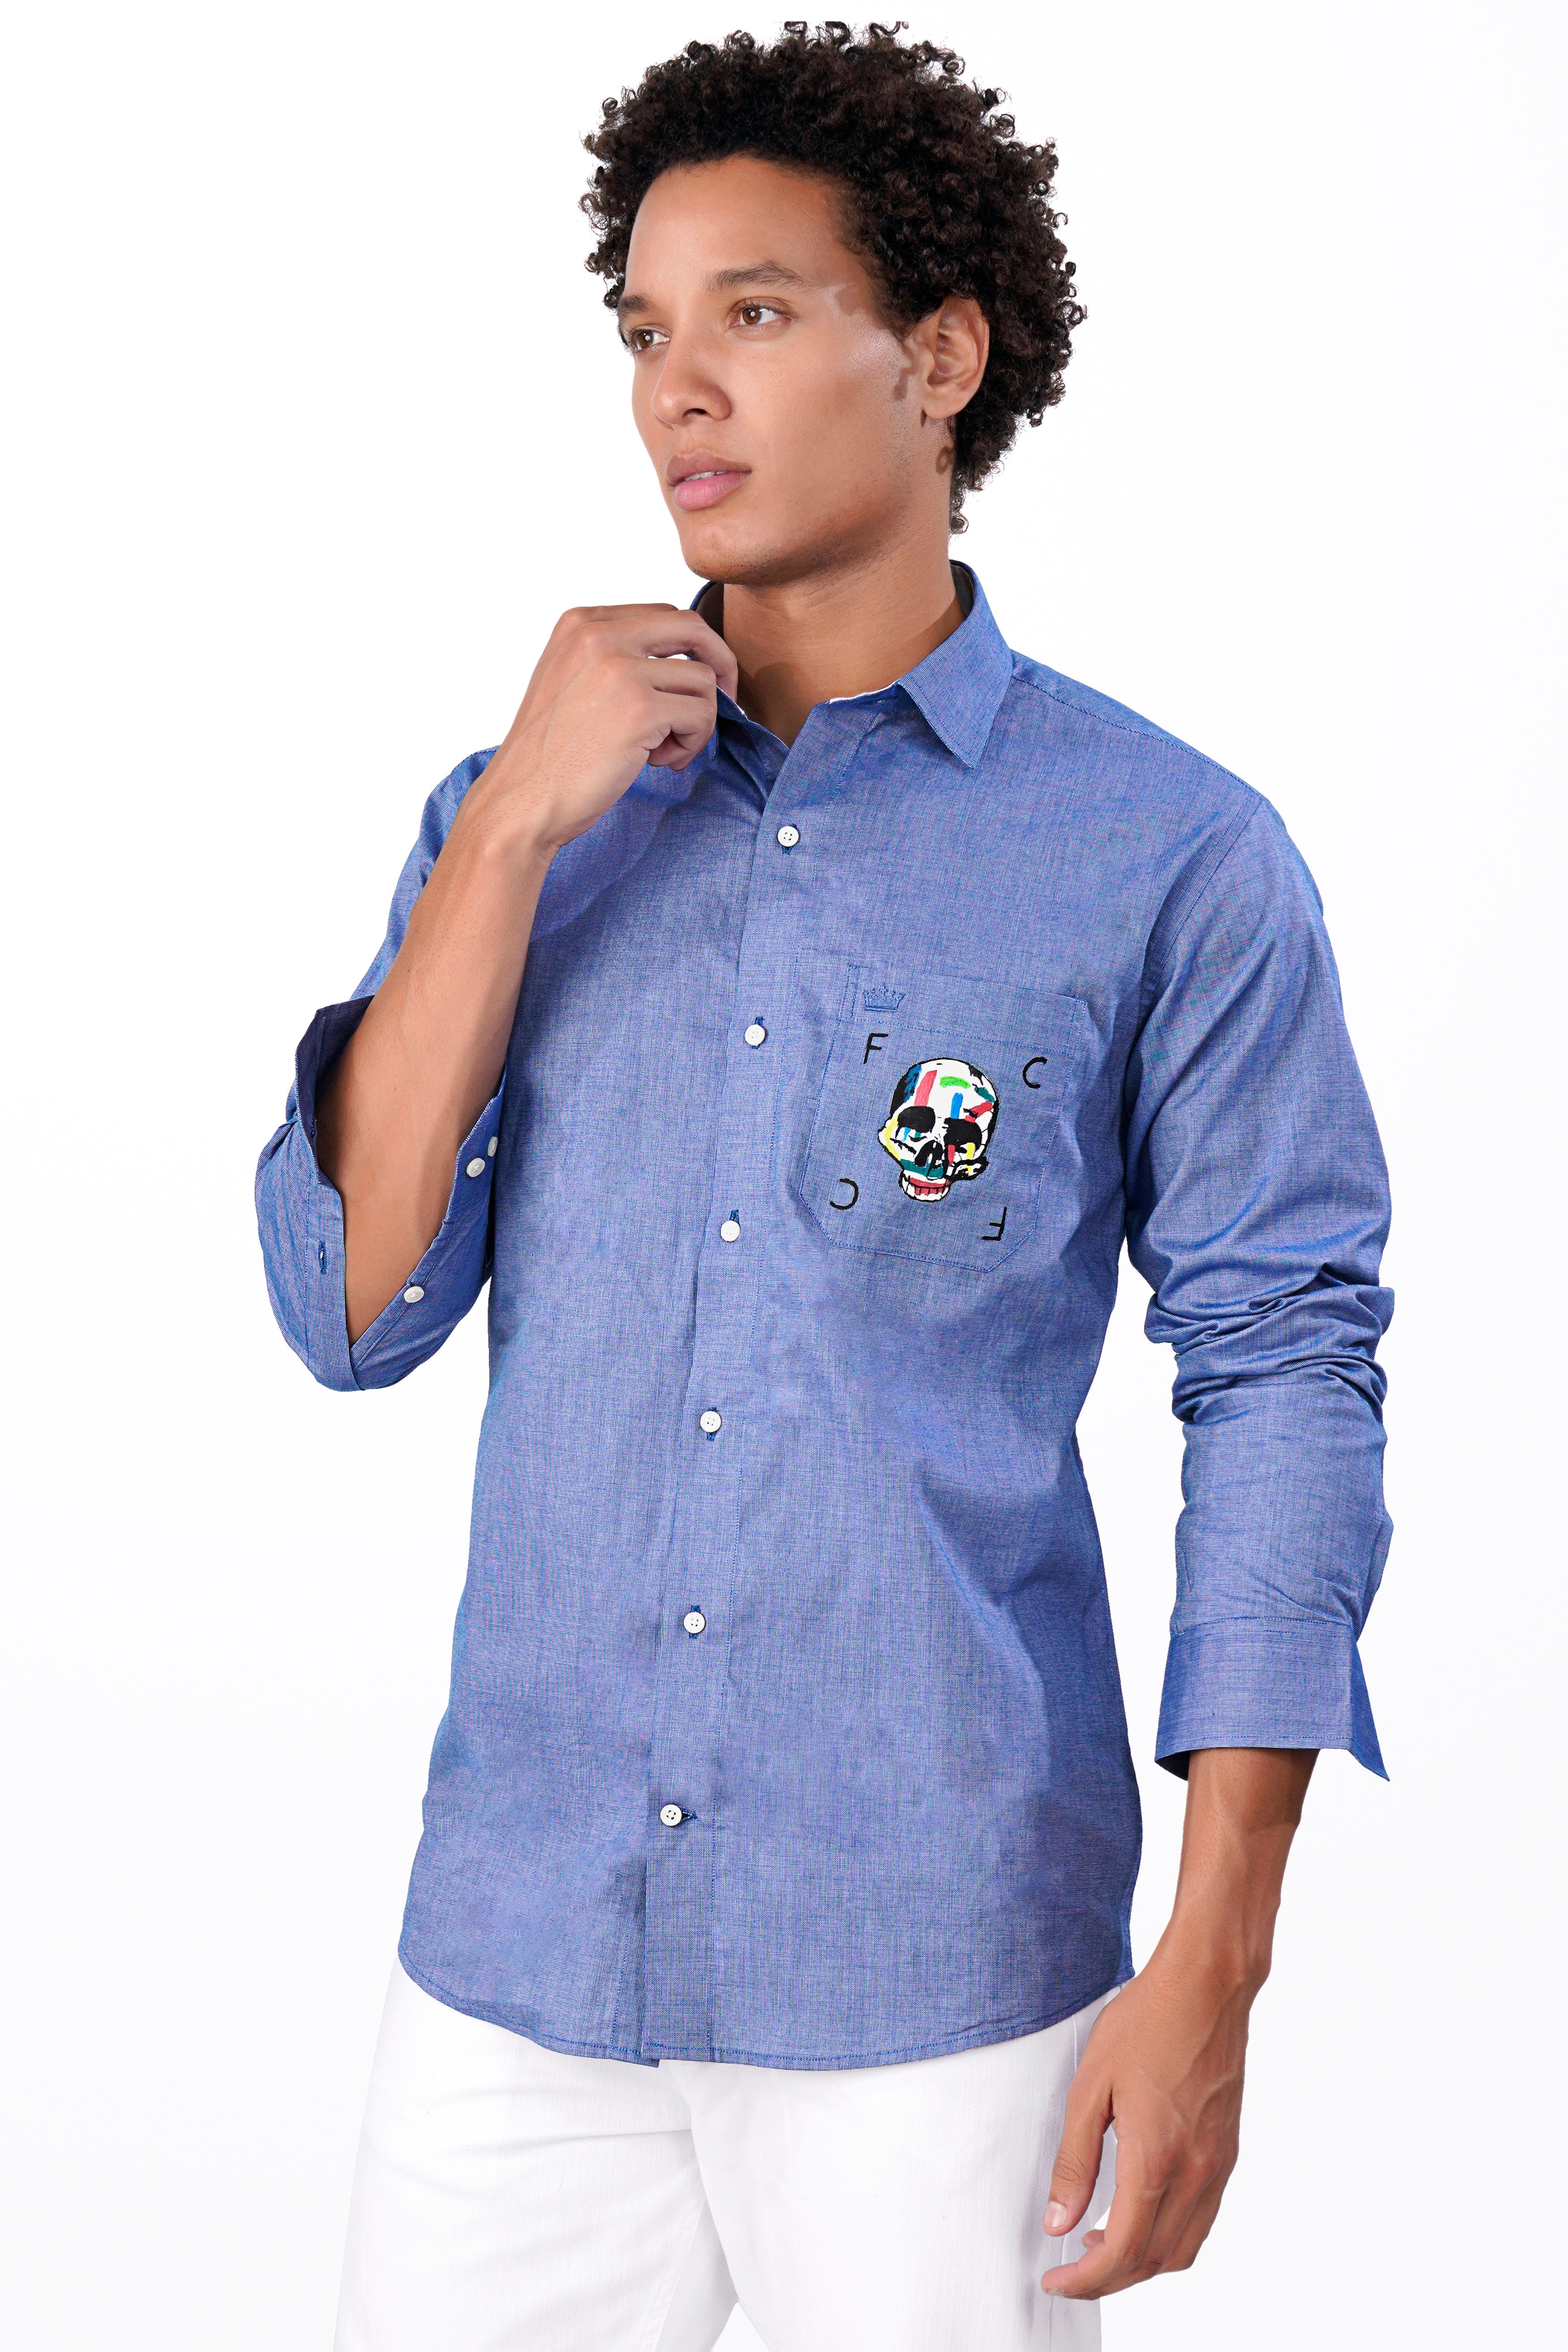 Yonder Blue Funky Hand Painted Chambray Designer Shirt 8046-CP-ART-38, 8046-CP-ART-H-38, 8046-CP-ART-39, 8046-CP-ART-H-39, 8046-CP-ART-40, 8046-CP-ART-H-40, 8046-CP-ART-42, 8046-CP-ART-H-42, 8046-CP-ART-44, 8046-CP-ART-H-44, 8046-CP-ART-46, 8046-CP-ART-H-46, 8046-CP-ART-48, 8046-CP-ART-H-48, 8046-CP-ART-50, 8046-CP-ART-H-50, 8046-CP-ART-52, 8046-CP-ART-H-52